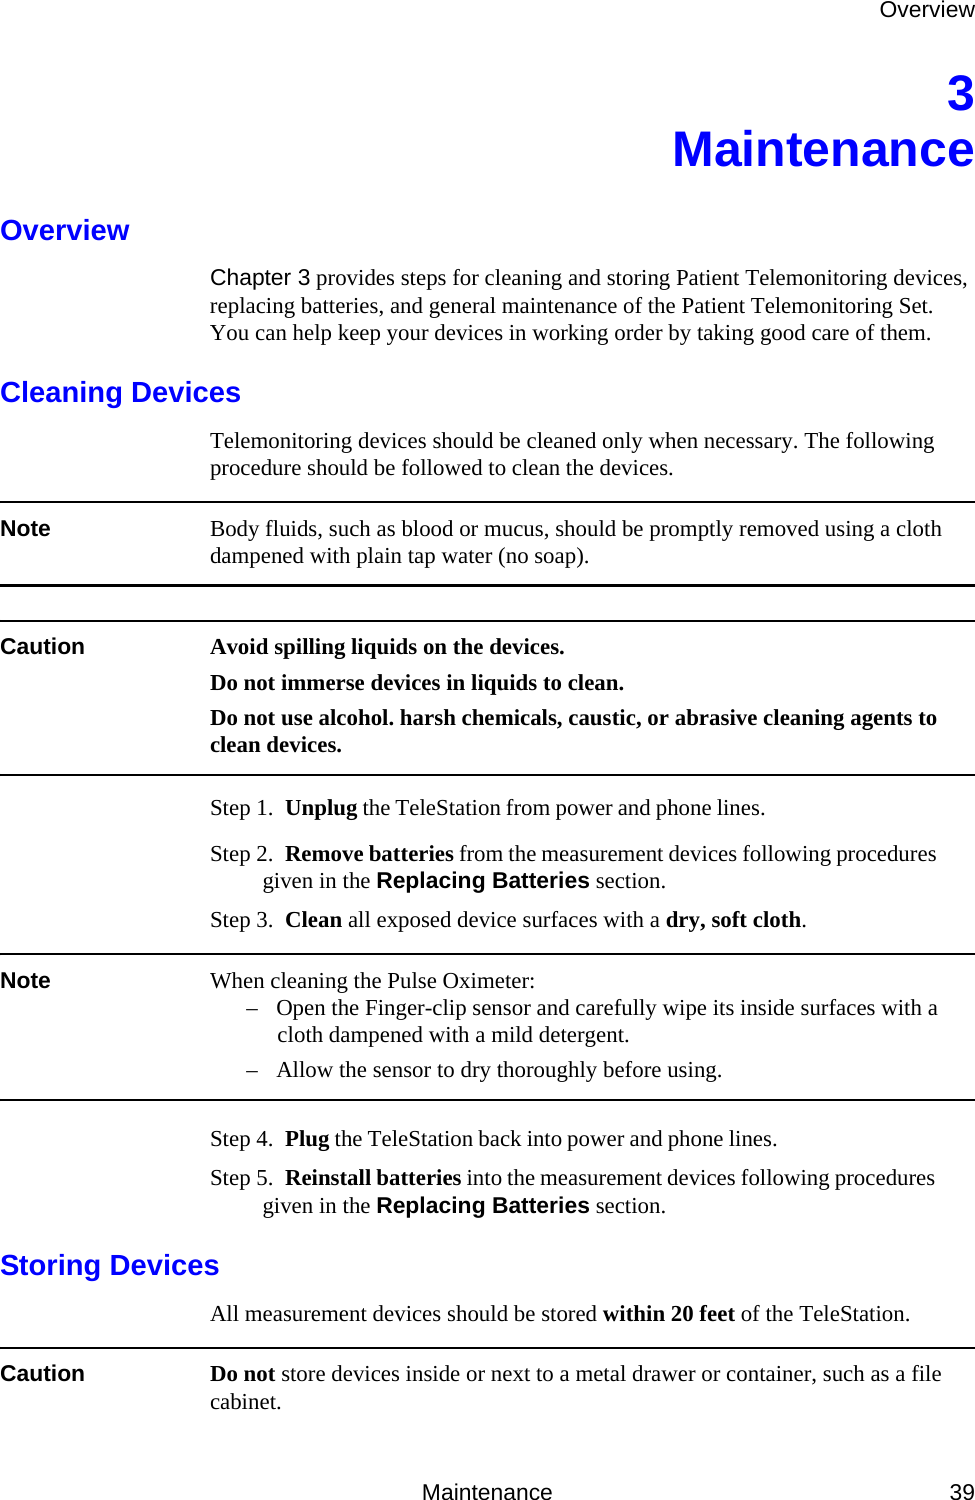 OverviewMaintenance 393MaintenanceOverviewChapter 3 provides steps for cleaning and storing Patient Telemonitoring devices, replacing batteries, and general maintenance of the Patient Telemonitoring Set. You can help keep your devices in working order by taking good care of them.Cleaning DevicesTelemonitoring devices should be cleaned only when necessary. The following procedure should be followed to clean the devices.Note Body fluids, such as blood or mucus, should be promptly removed using a cloth dampened with plain tap water (no soap).Caution Avoid spilling liquids on the devices.Do not immerse devices in liquids to clean.Do not use alcohol. harsh chemicals, caustic, or abrasive cleaning agents to clean devices.Step 1.  Unplug the TeleStation from power and phone lines. Step 2.  Remove batteries from the measurement devices following procedures given in the Replacing Batteries section.Step 3.  Clean all exposed device surfaces with a dry, soft cloth.Note When cleaning the Pulse Oximeter:– Open the Finger-clip sensor and carefully wipe its inside surfaces with a cloth dampened with a mild detergent.– Allow the sensor to dry thoroughly before using.Step 4.  Plug the TeleStation back into power and phone lines. Step 5.  Reinstall batteries into the measurement devices following procedures given in the Replacing Batteries section.Storing DevicesAll measurement devices should be stored within 20 feet of the TeleStation.Caution Do not store devices inside or next to a metal drawer or container, such as a file cabinet.